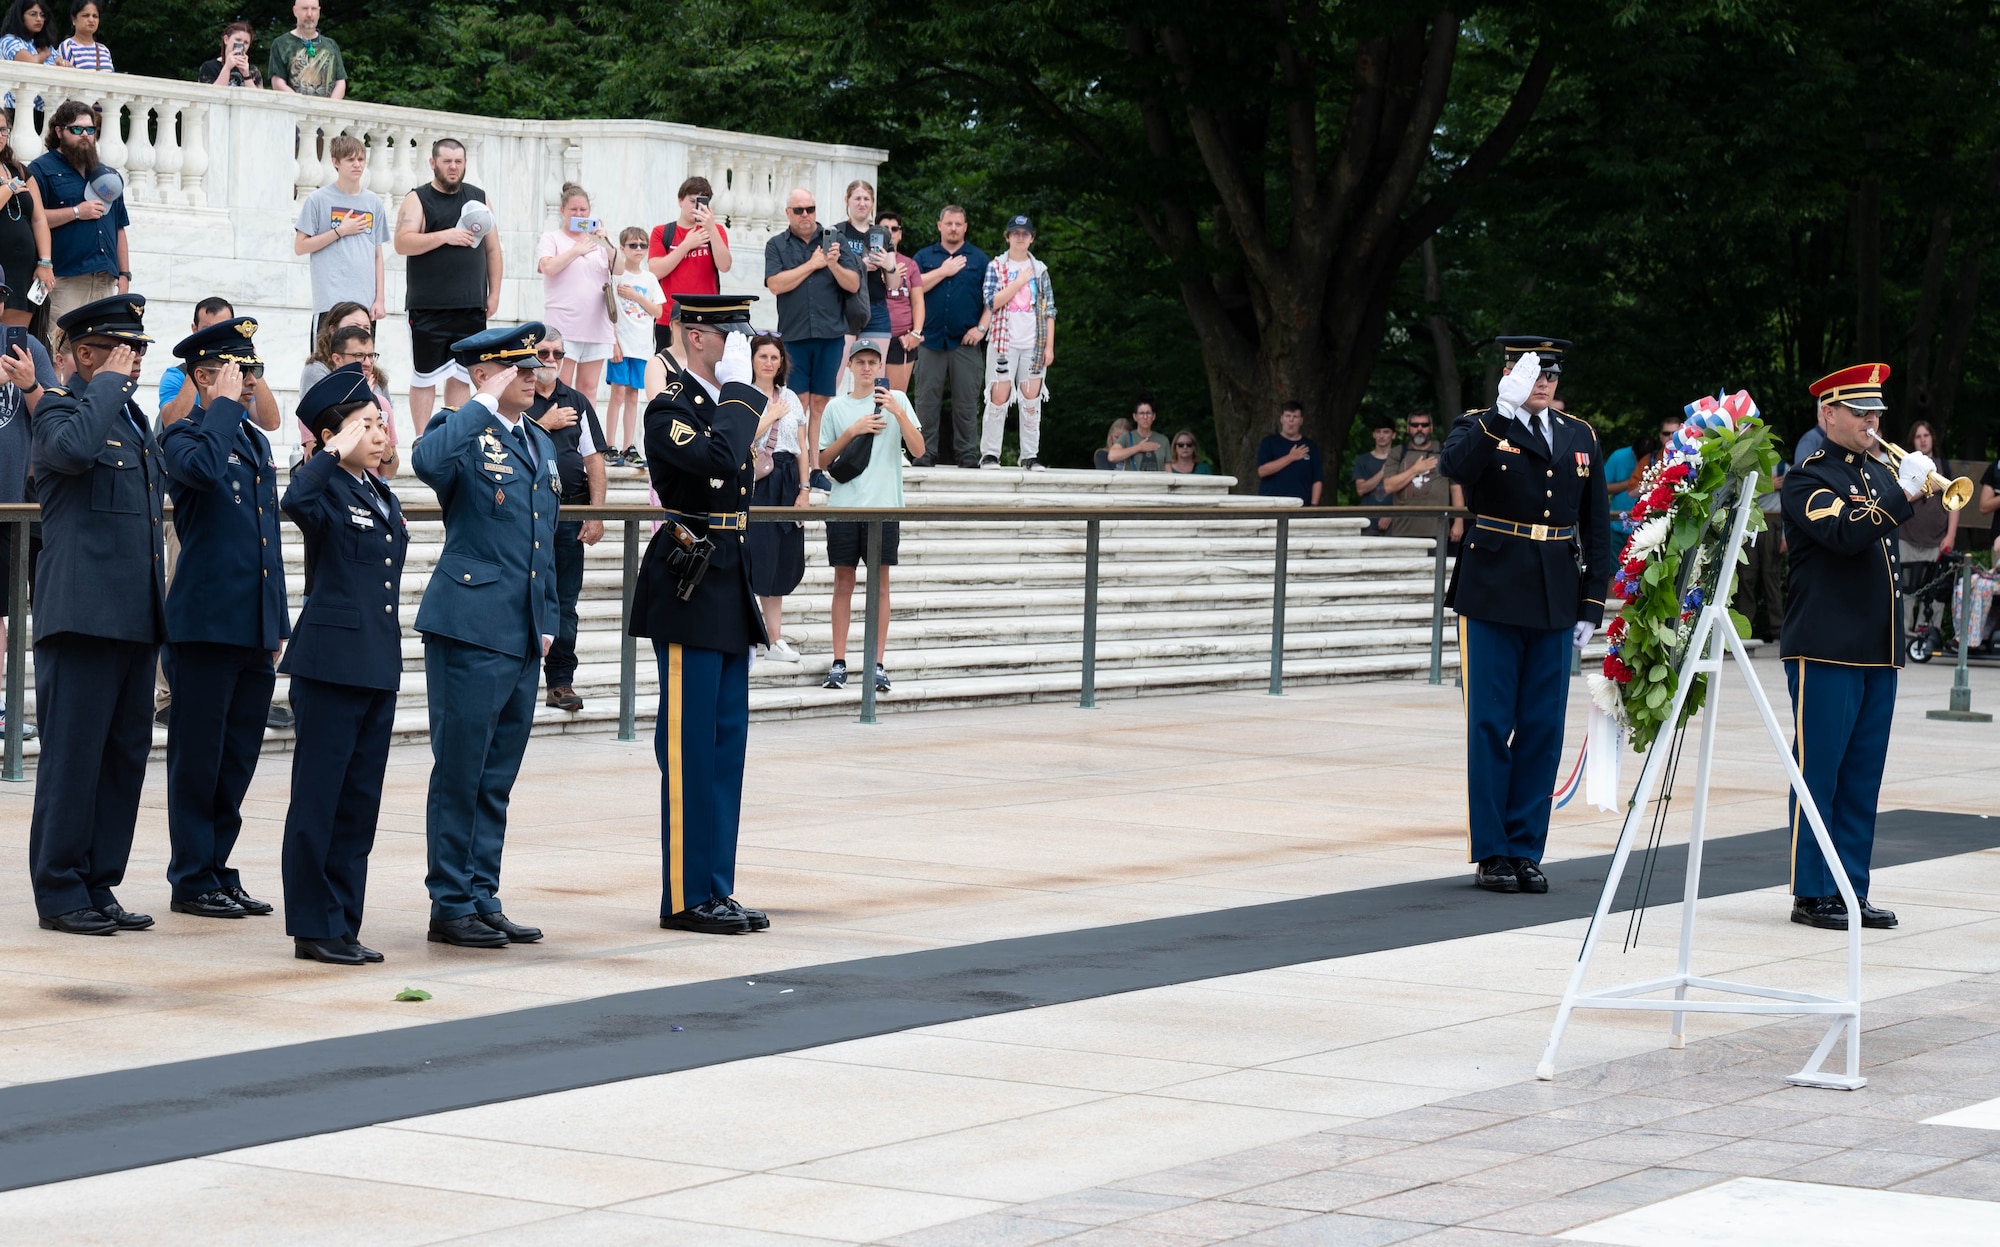 Military officers from Ukraine, Japan, Columbia and South Africa participate in the ceremonial laying of the wreath at the Tomb of the Unknown Soldier in Arlington National Cemetery July 10, 2023. International military students from the 2023-2024 Air Command and Staff College class paid formal respect to the sacrifices of America’s veterans by placing a wreath before the Tomb. The International Officer School at Air University sponsored the Washington D.C. trip July 9-13, 2023 for international students to develop a deeper understanding of the U.S federal government and U.S. military.